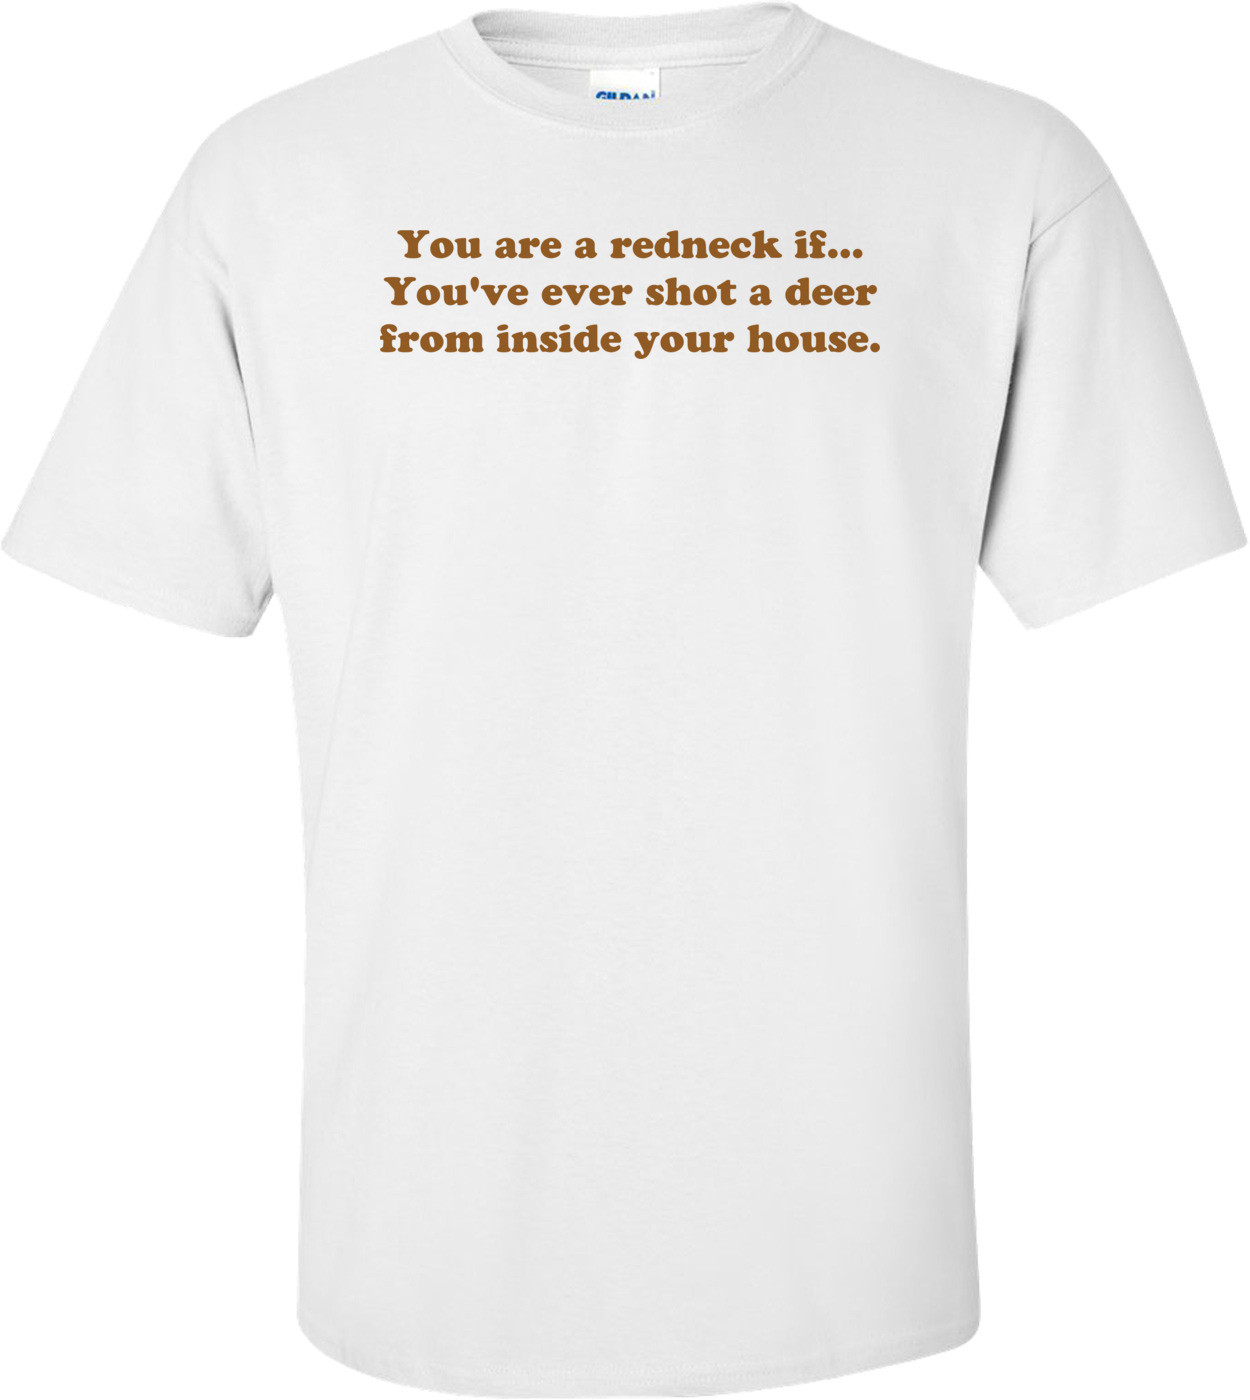 You are a redneck if... You've ever shot a deer from inside your house. Shirt